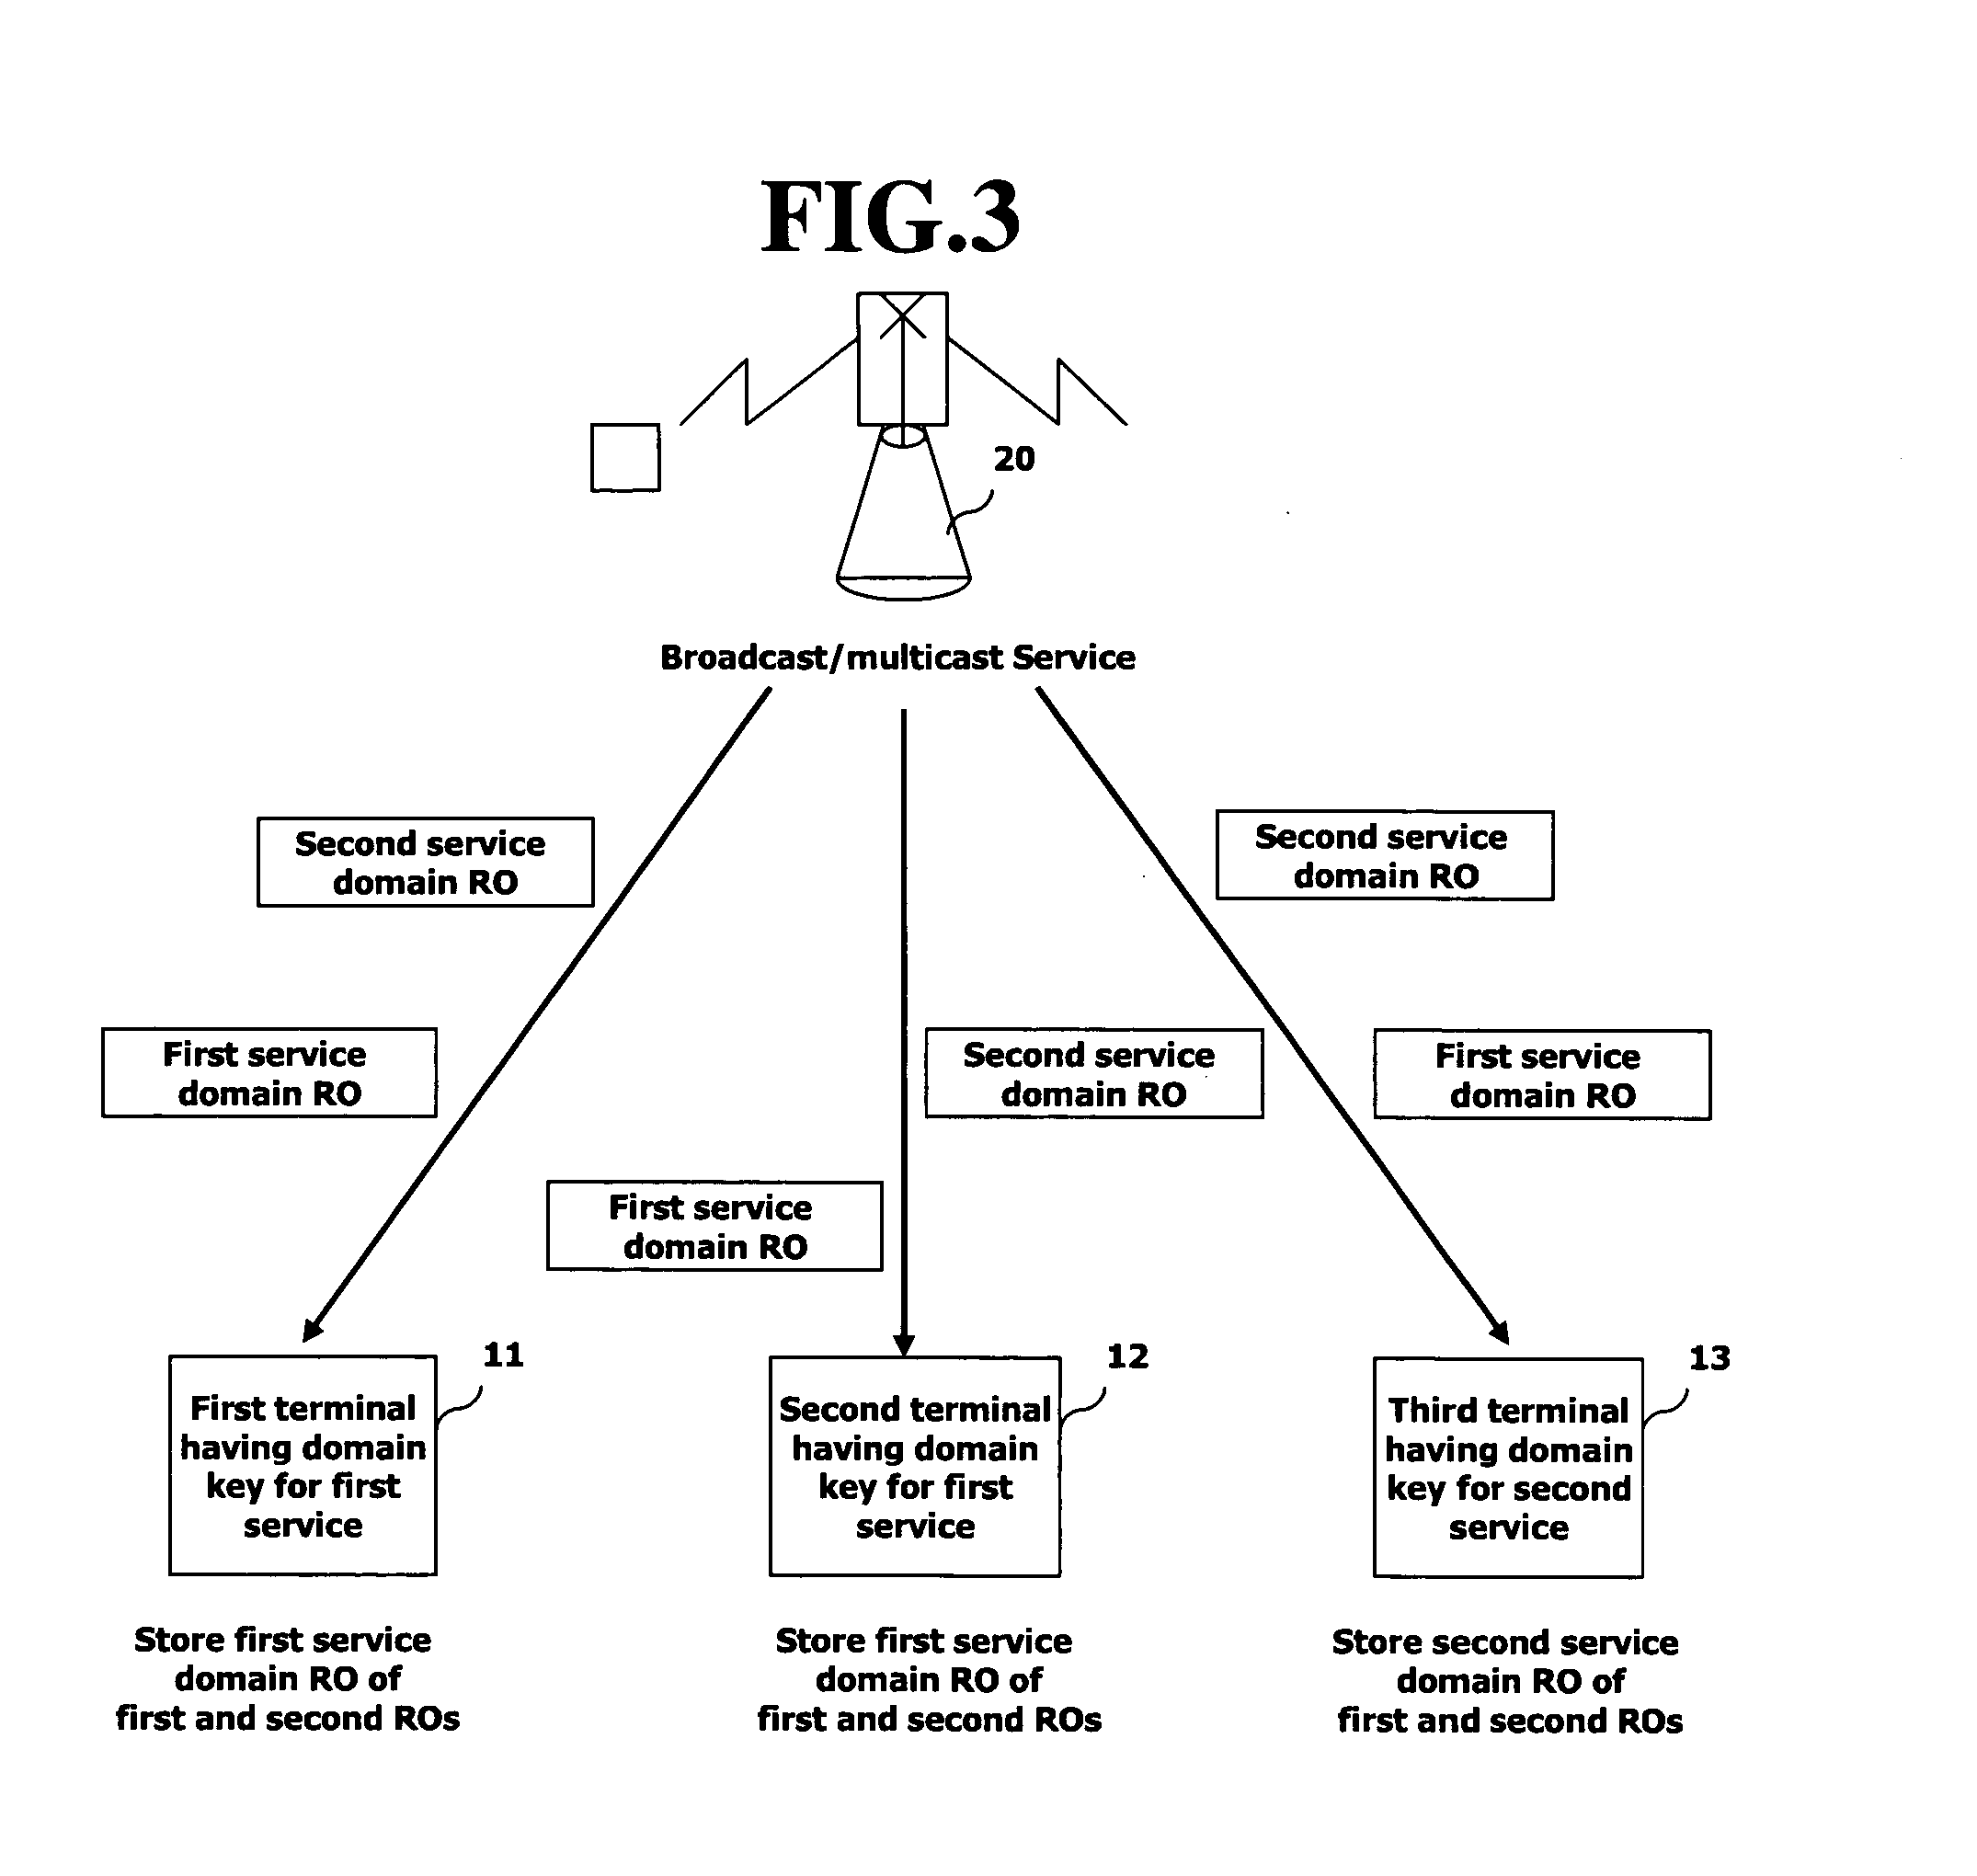 Method for managing digital rights in broadcast/multicast service